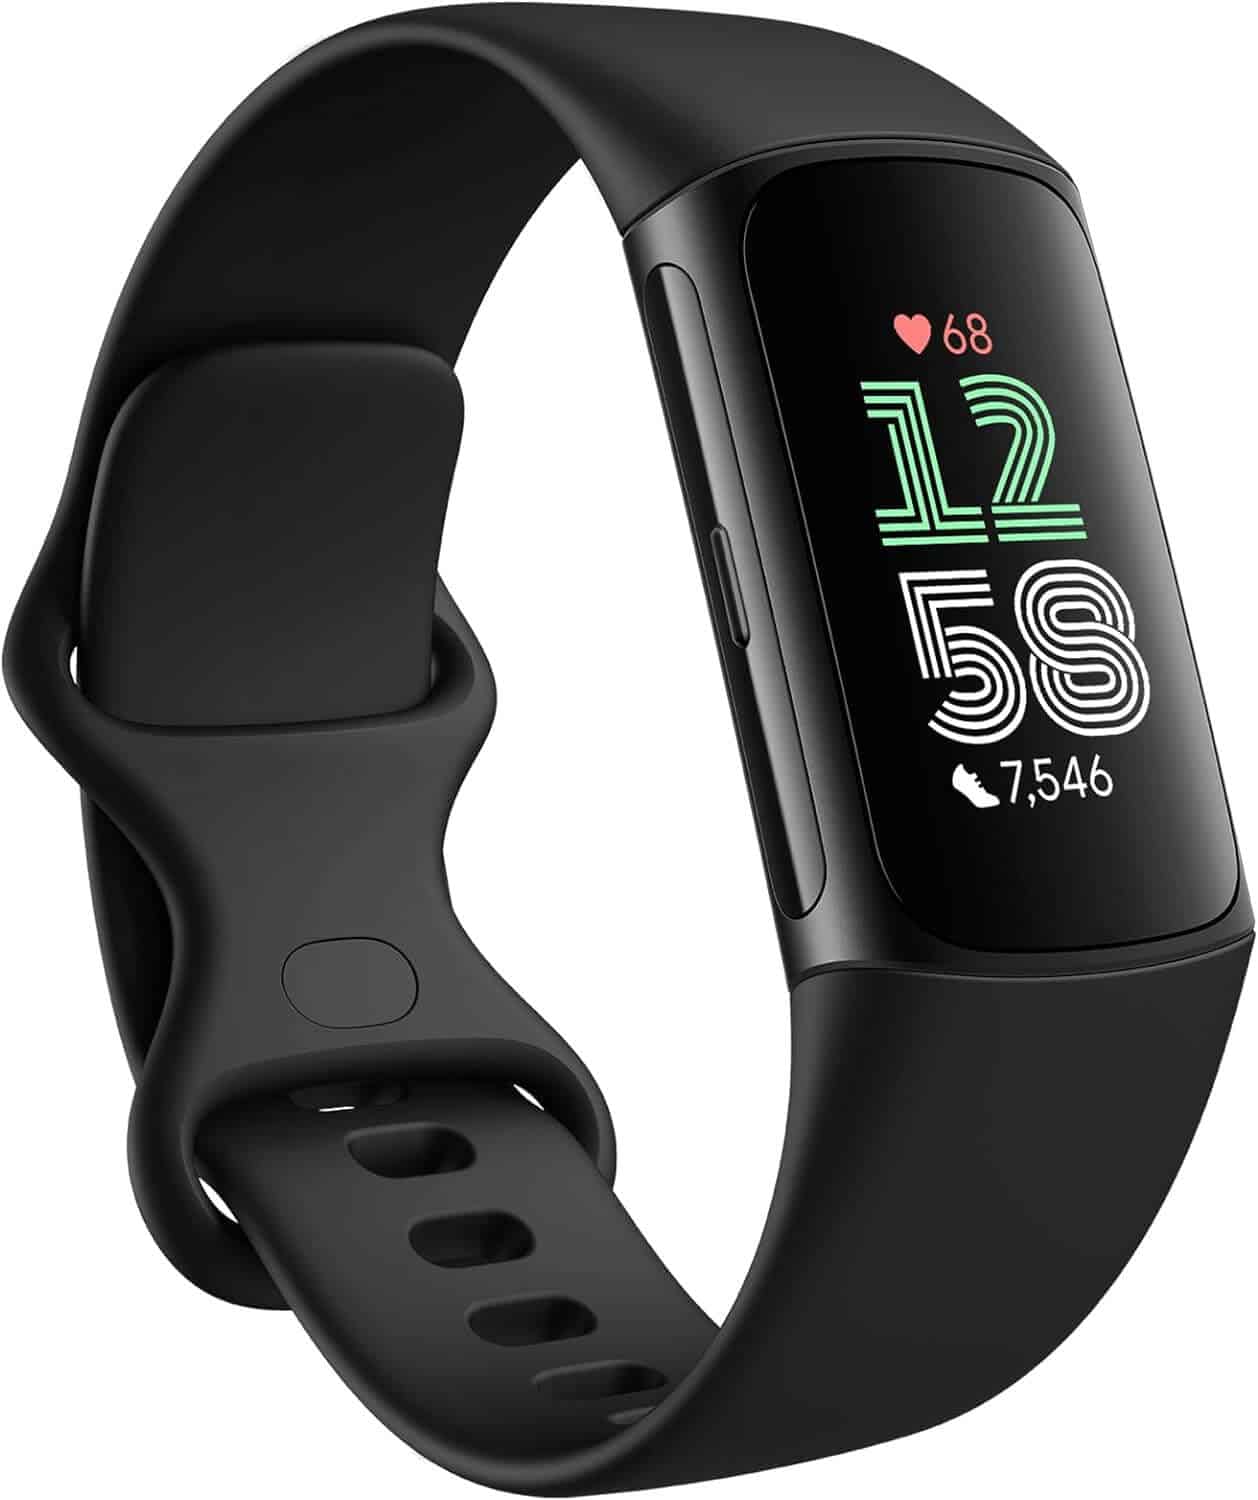 Fitness tracker for teens with GPS, heart rate monitoring and more